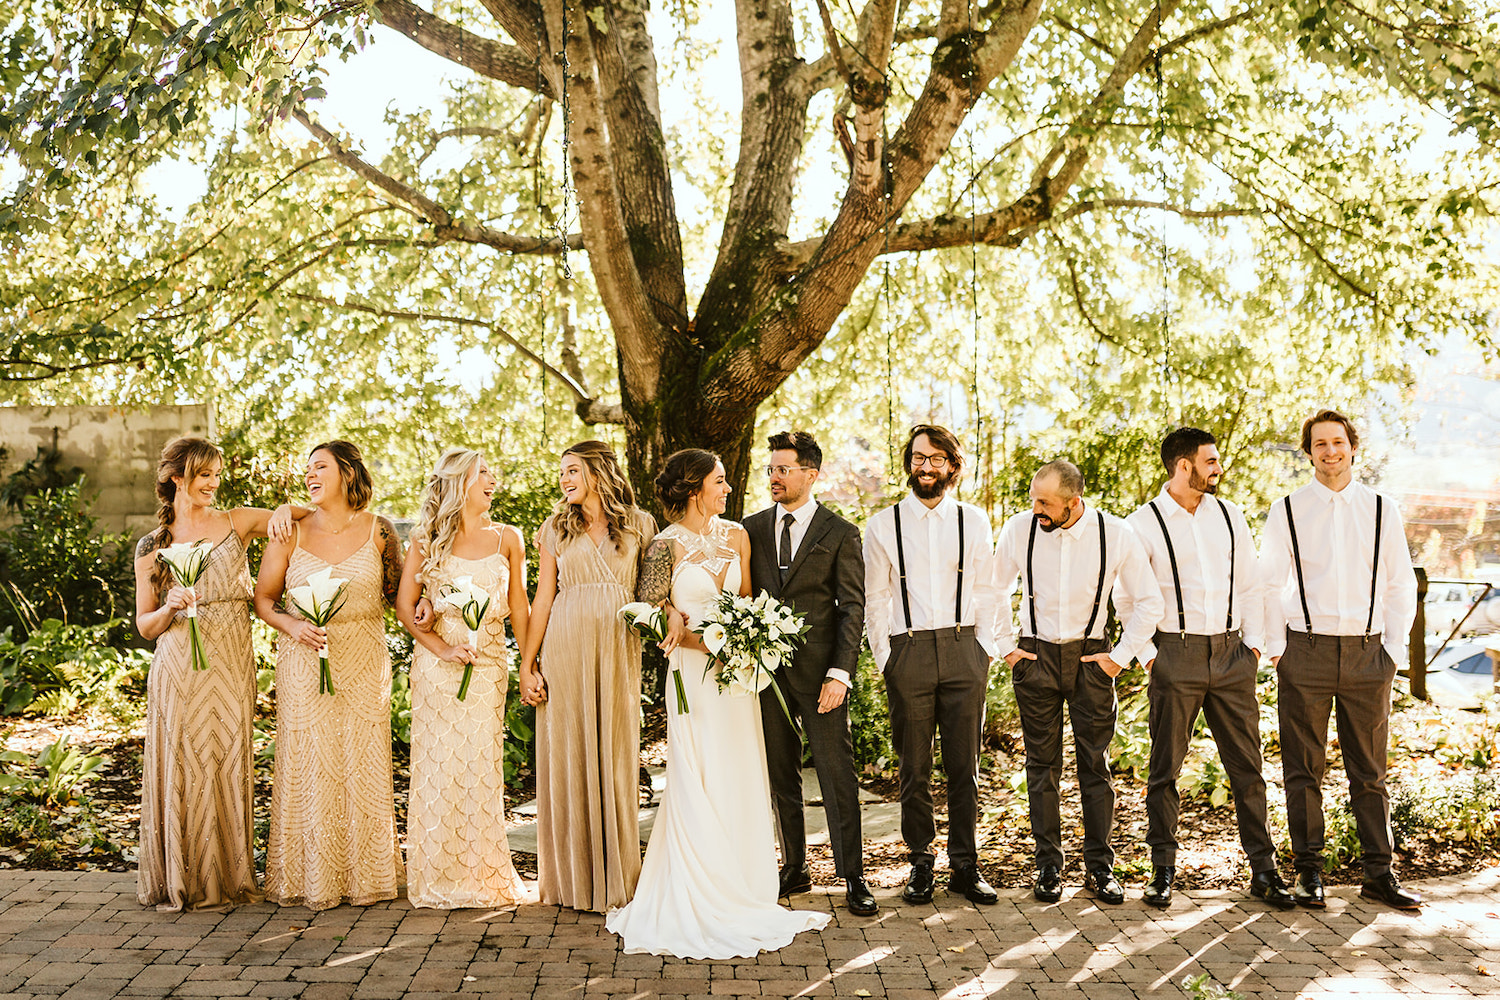 bride and groom stand with wedding party on stone paver path under large tree near Chattanooga, TN